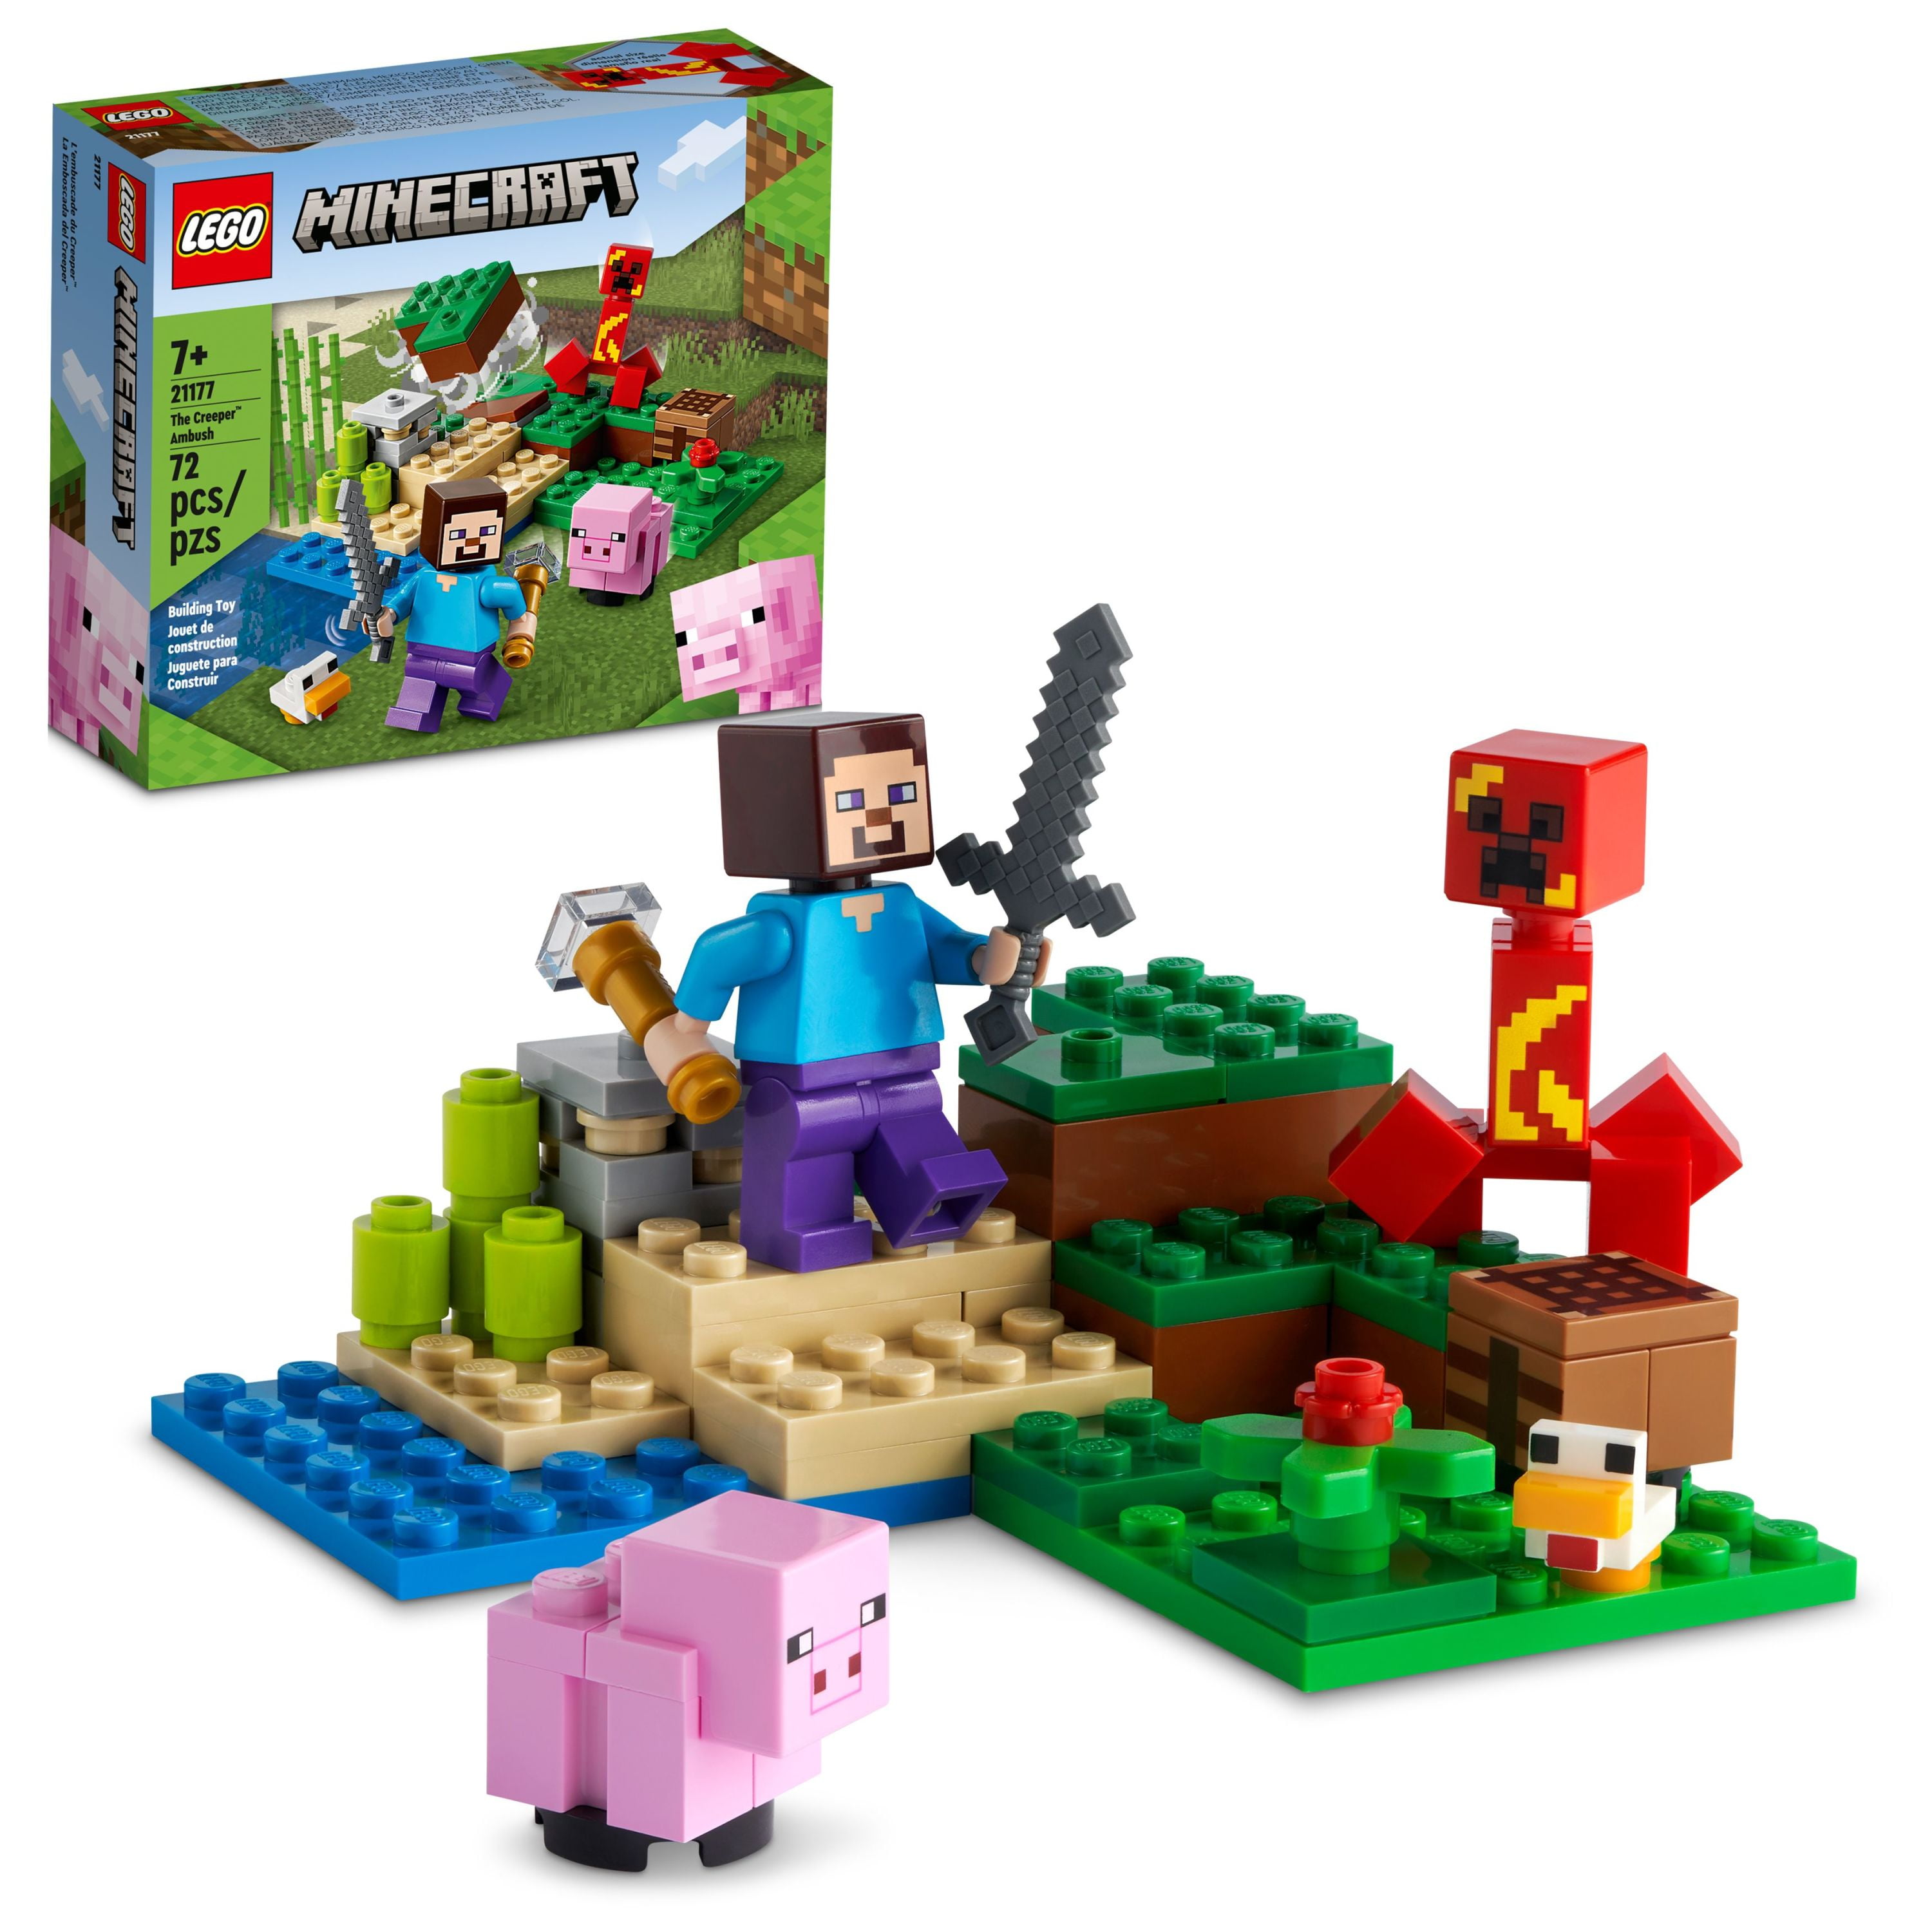 LEGO Minecraft The Creeper Ambush Building Toy 21177 with Steve, Baby Pig & Chicken Figures, Gift for Kids, Boys and Girls age 7 Plus Years Old